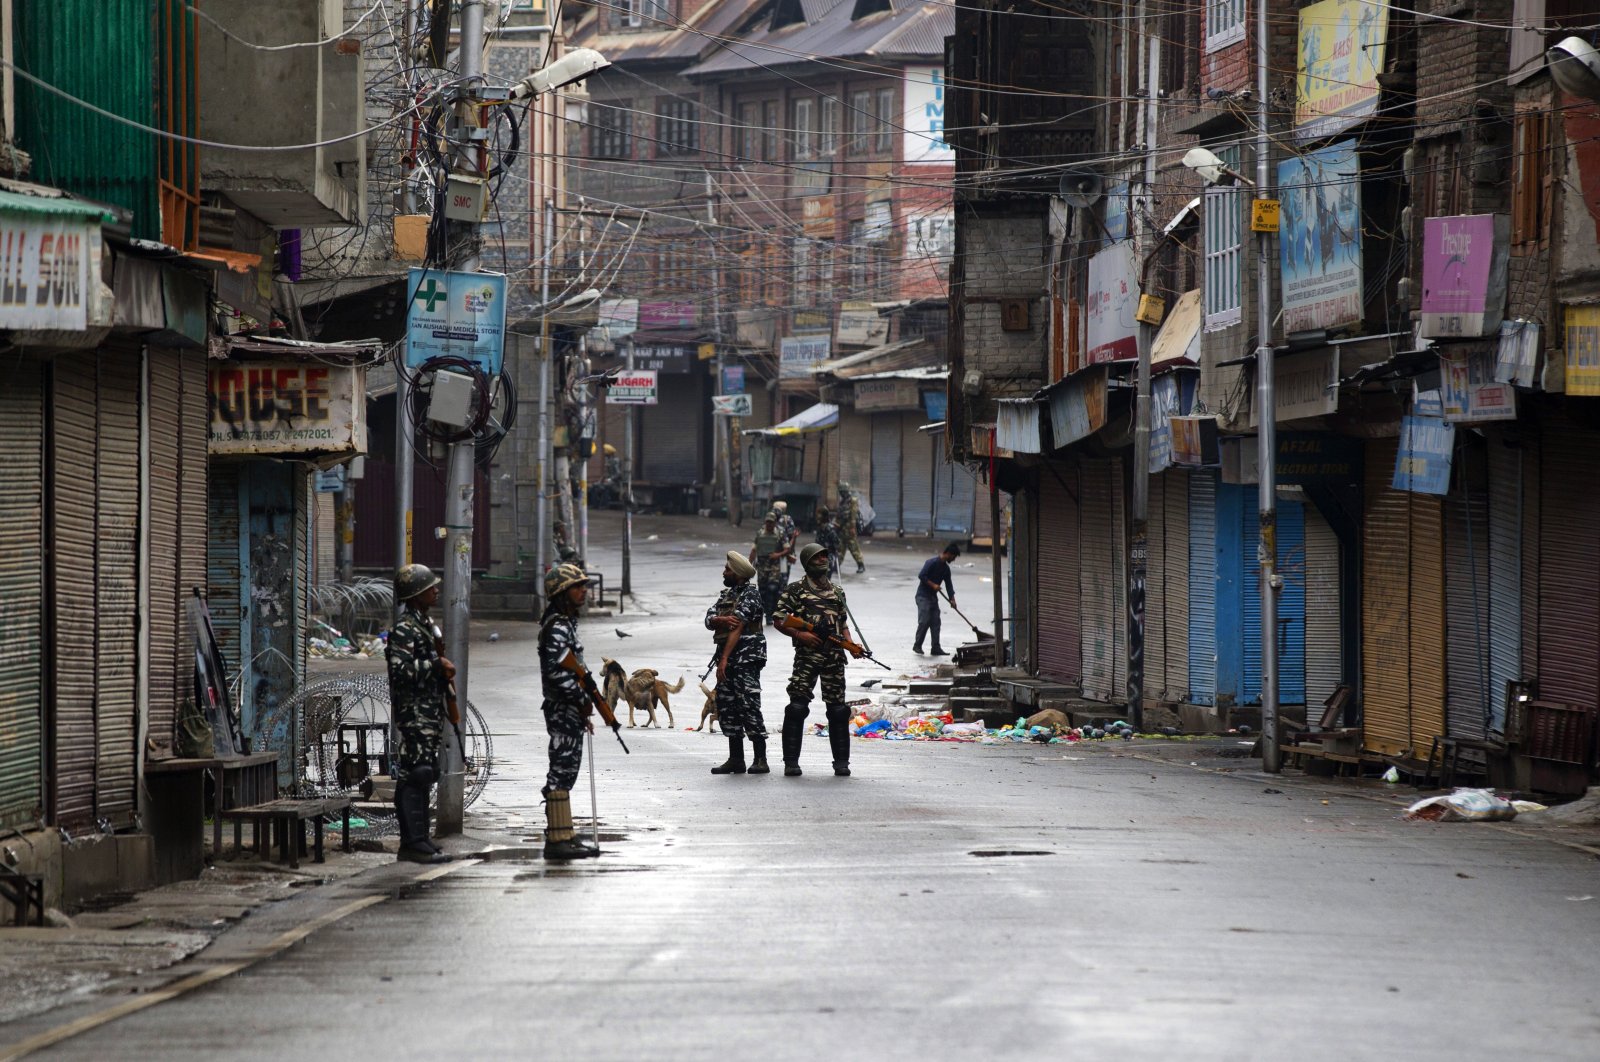 Indian paramilitary soldiers stand guard on a deserted street during curfew, Srinagar, Aug. 8, 2019. (AP Photo)
